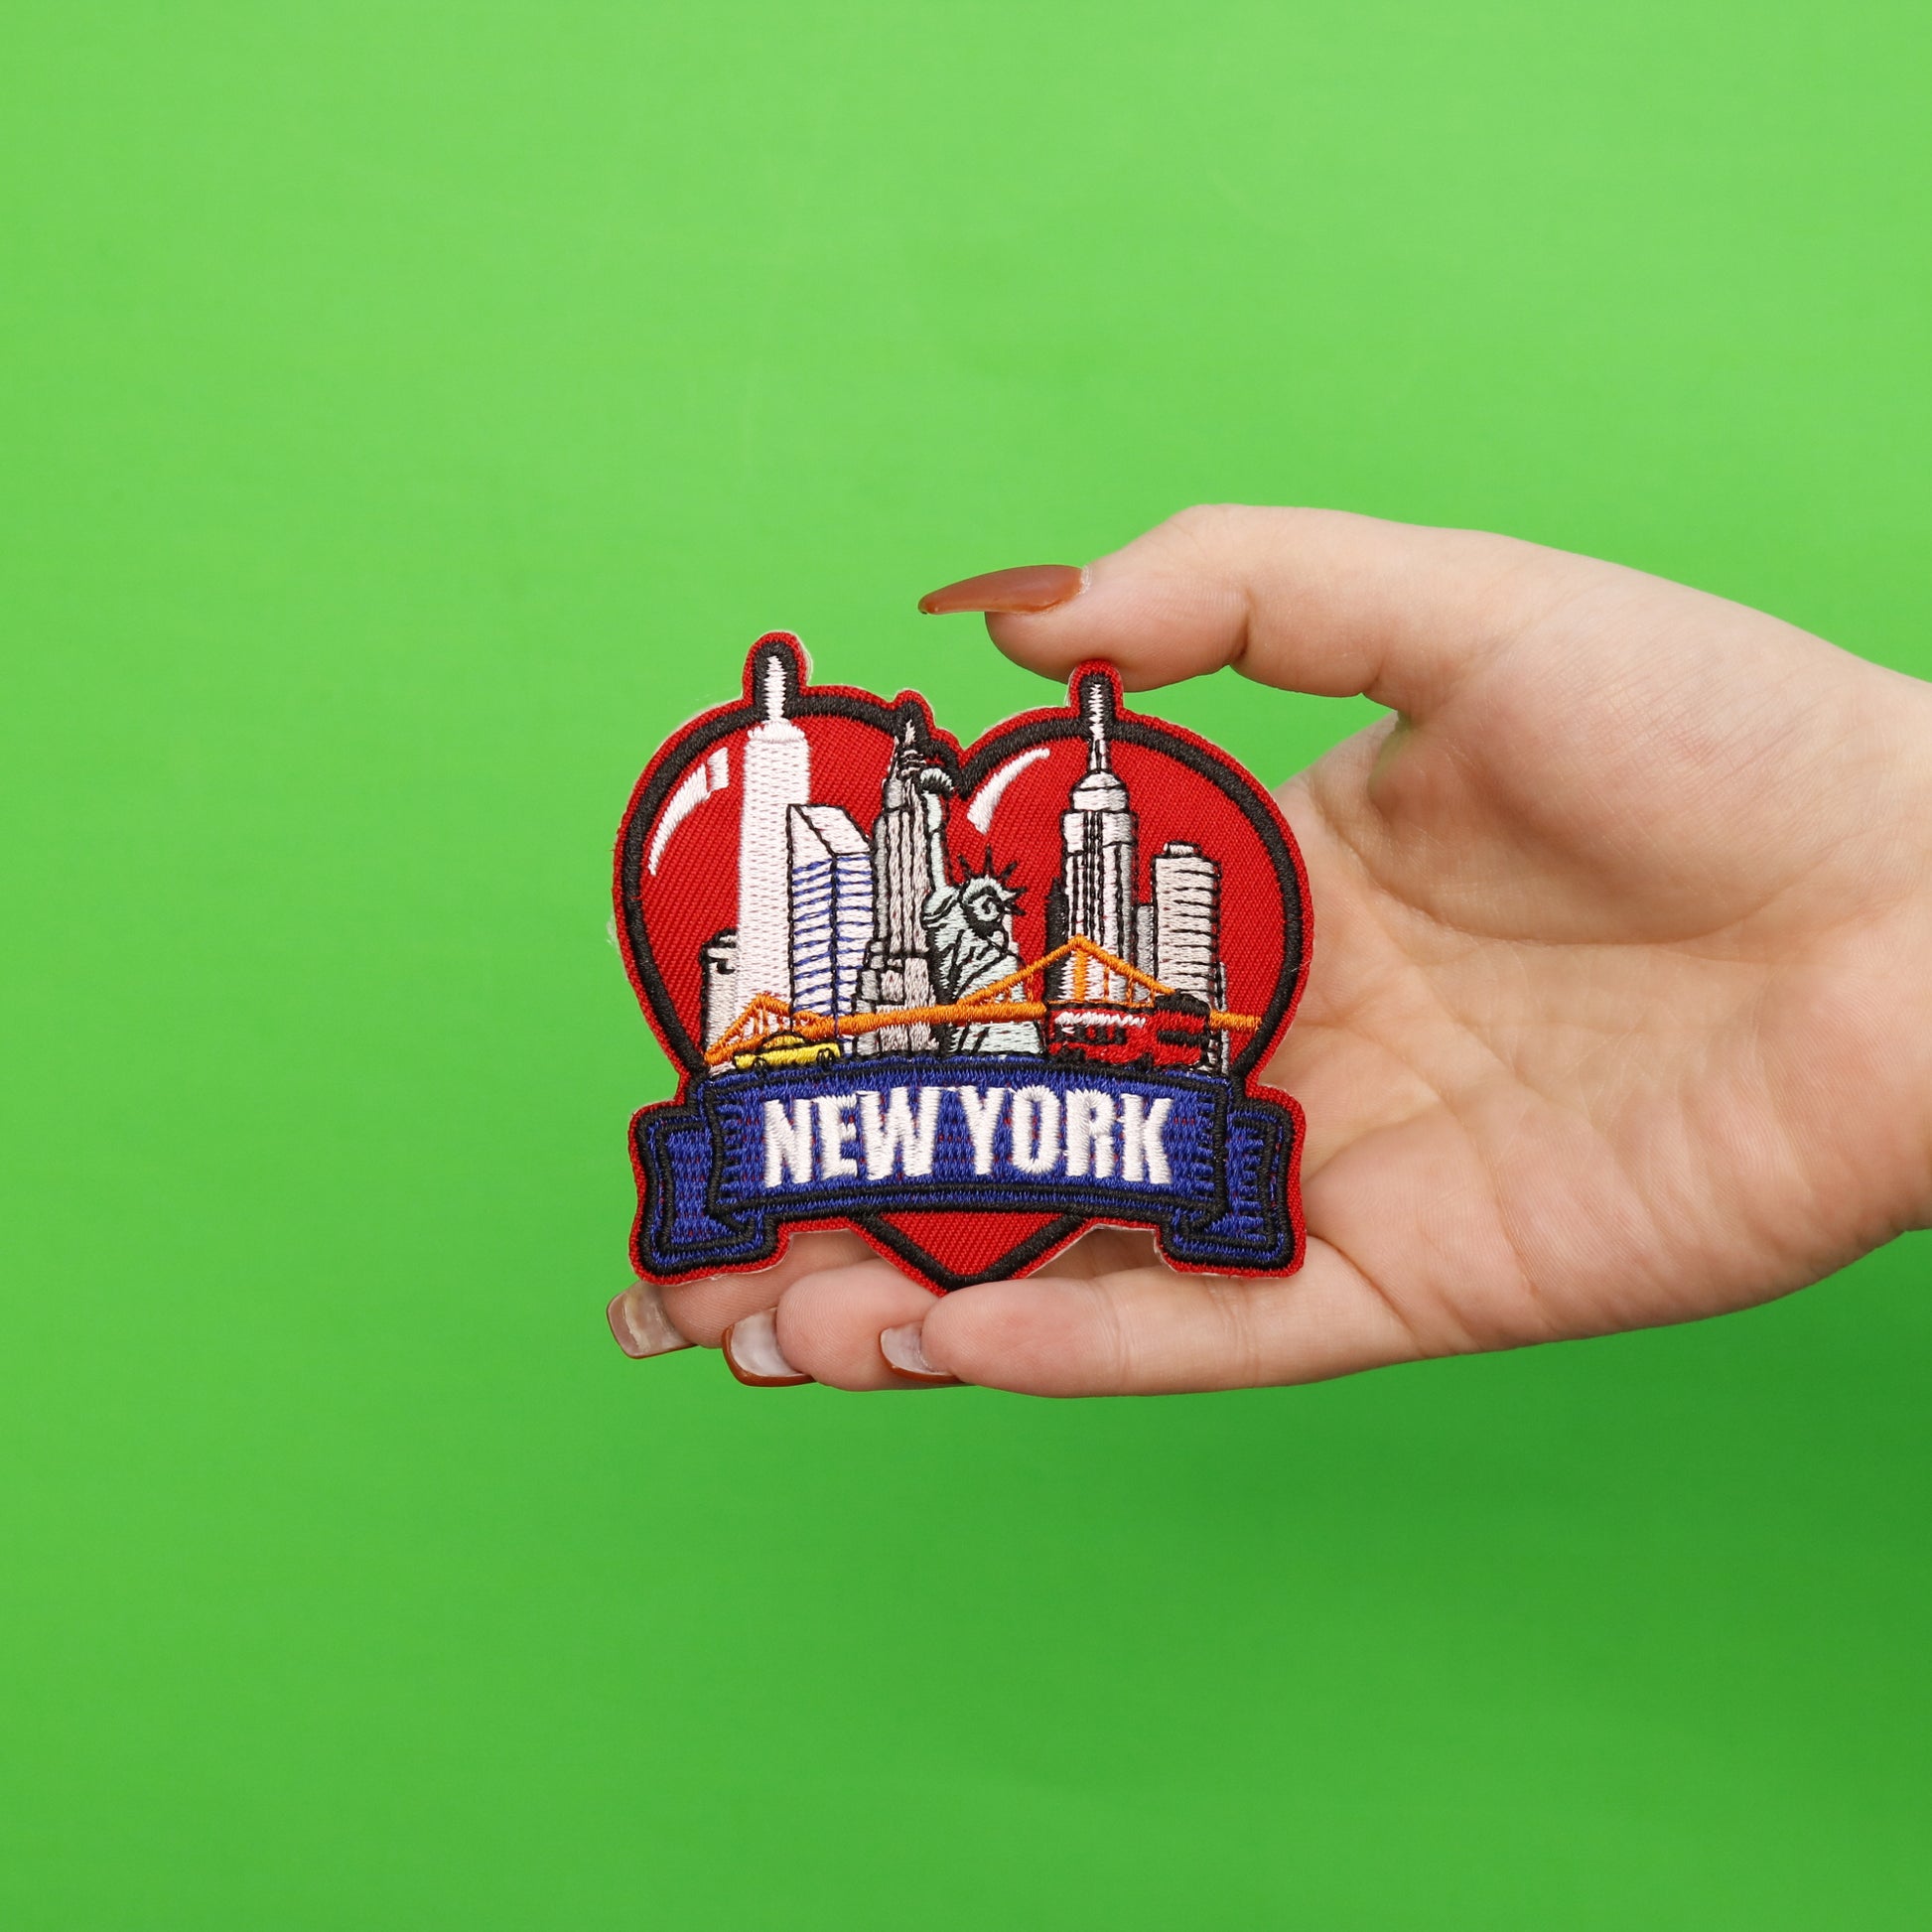 New York Skyline Red Heart Iron On Patch 